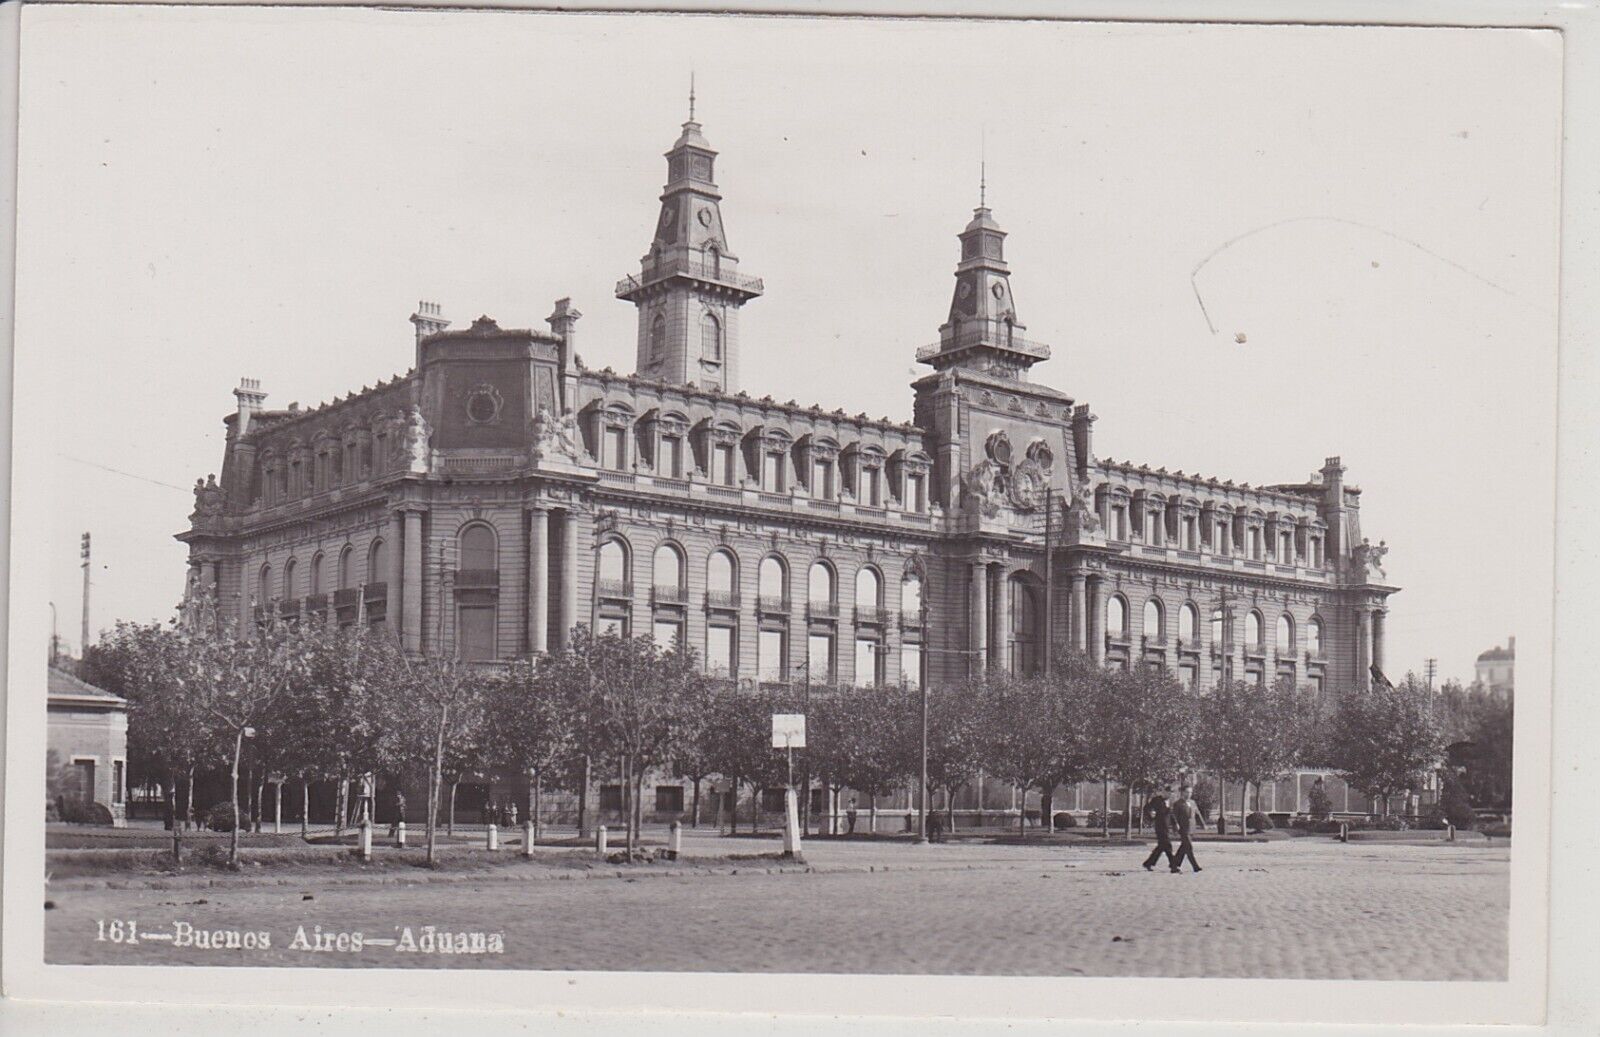 Buenos Aires, Argentina. Aduana (Customs Home) Vintage Real Photo Postcard.